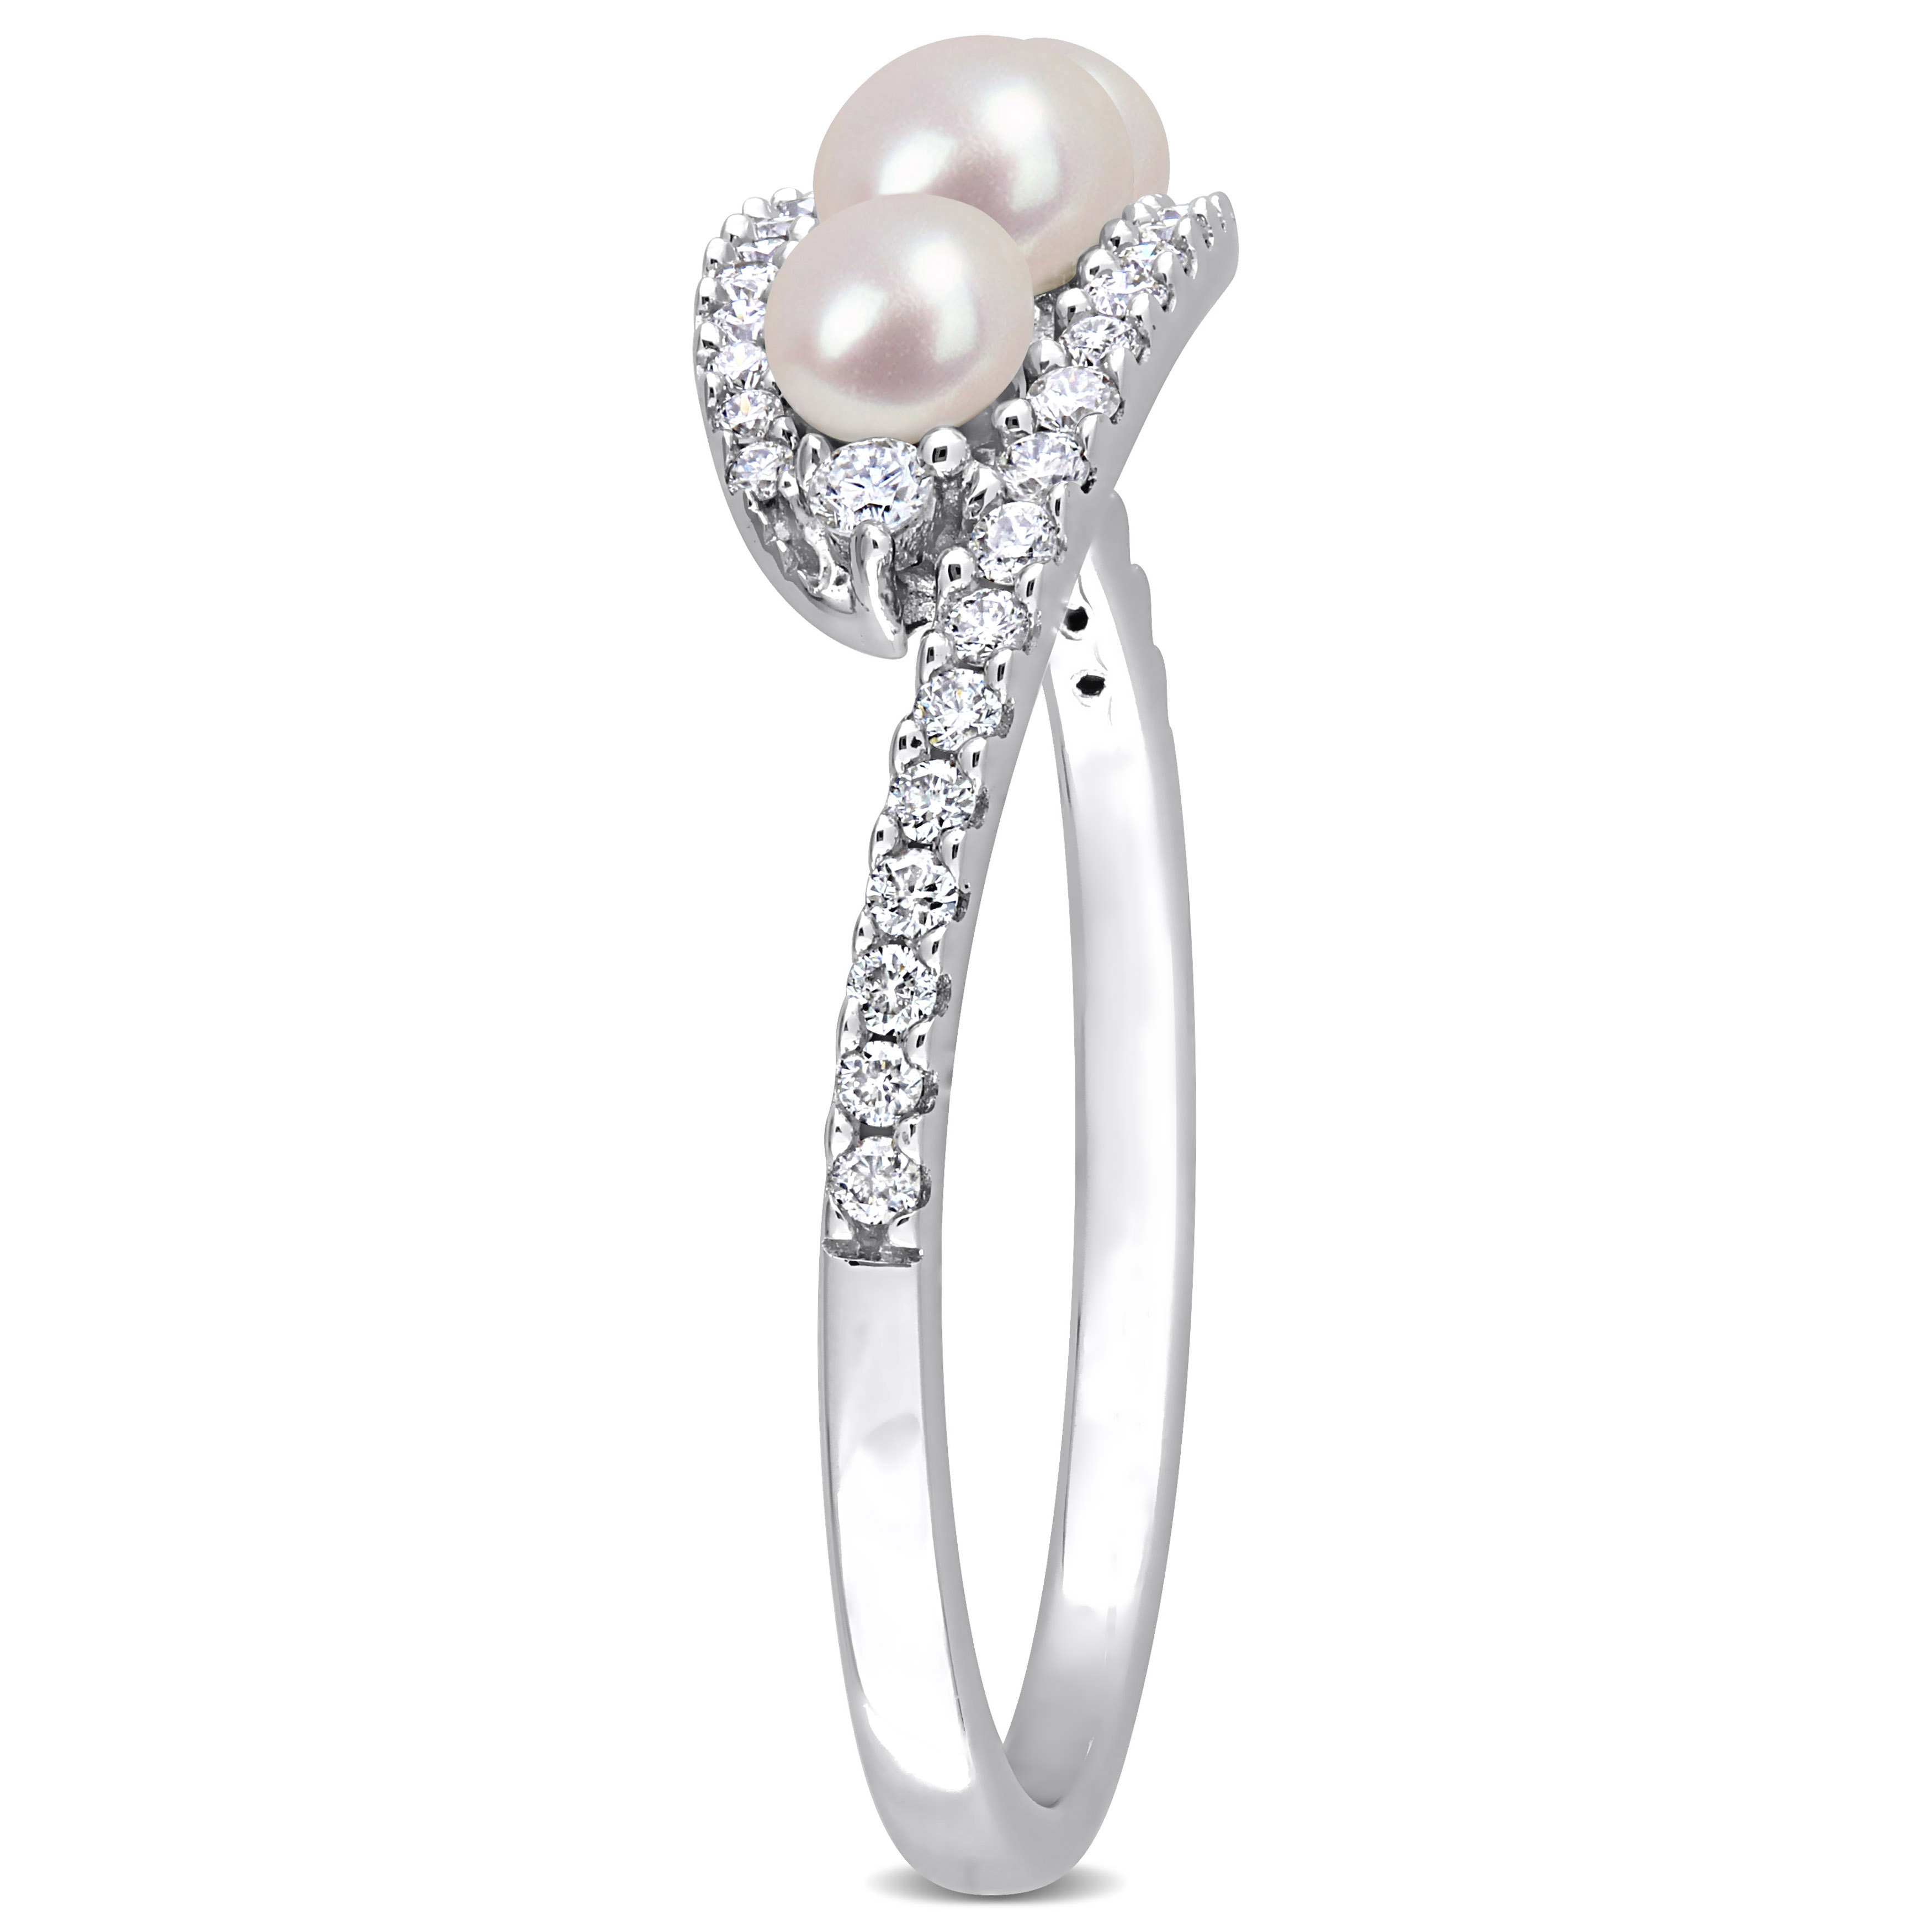 Cultured Freshwater Pearl and 1/5 CT TDW Diamond Bypass Ring in 14k White Gold